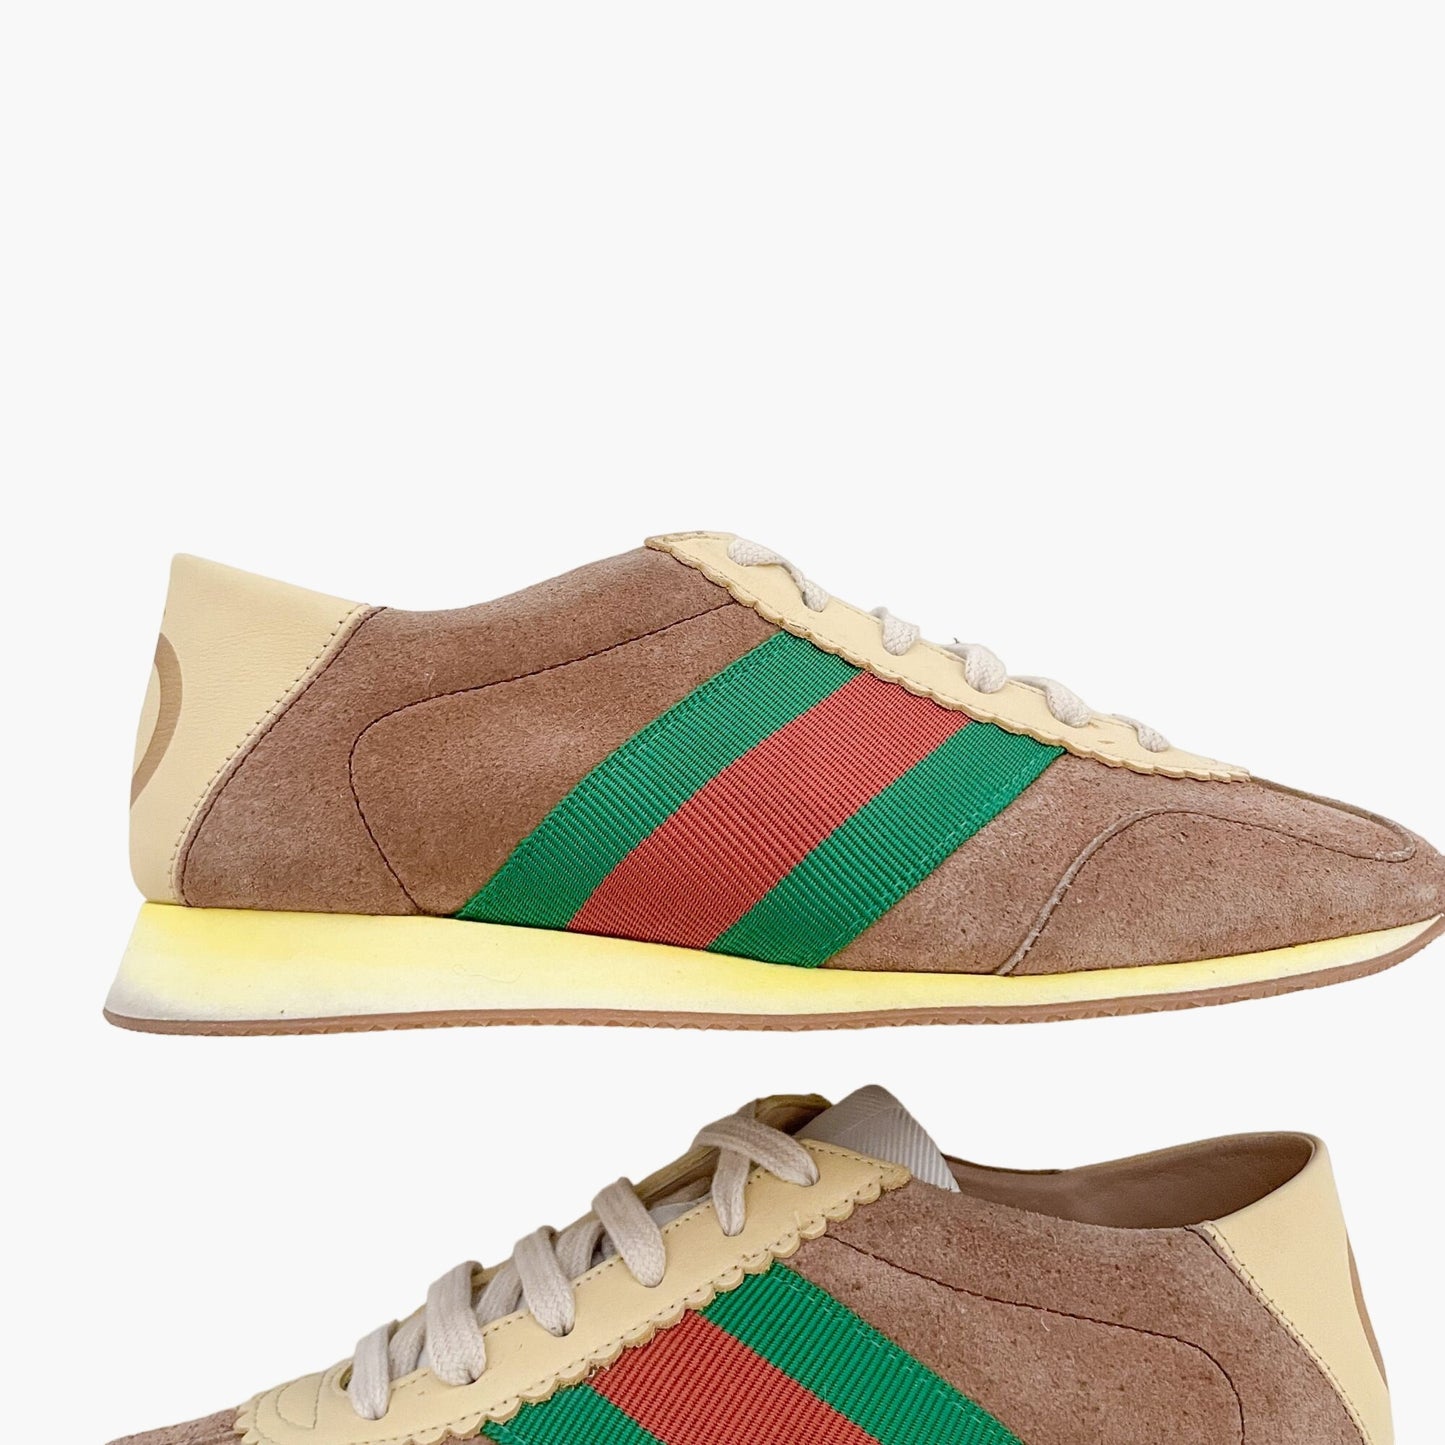 Gucci Rocket Collapsible Sneakers in Tan Suede Size 36